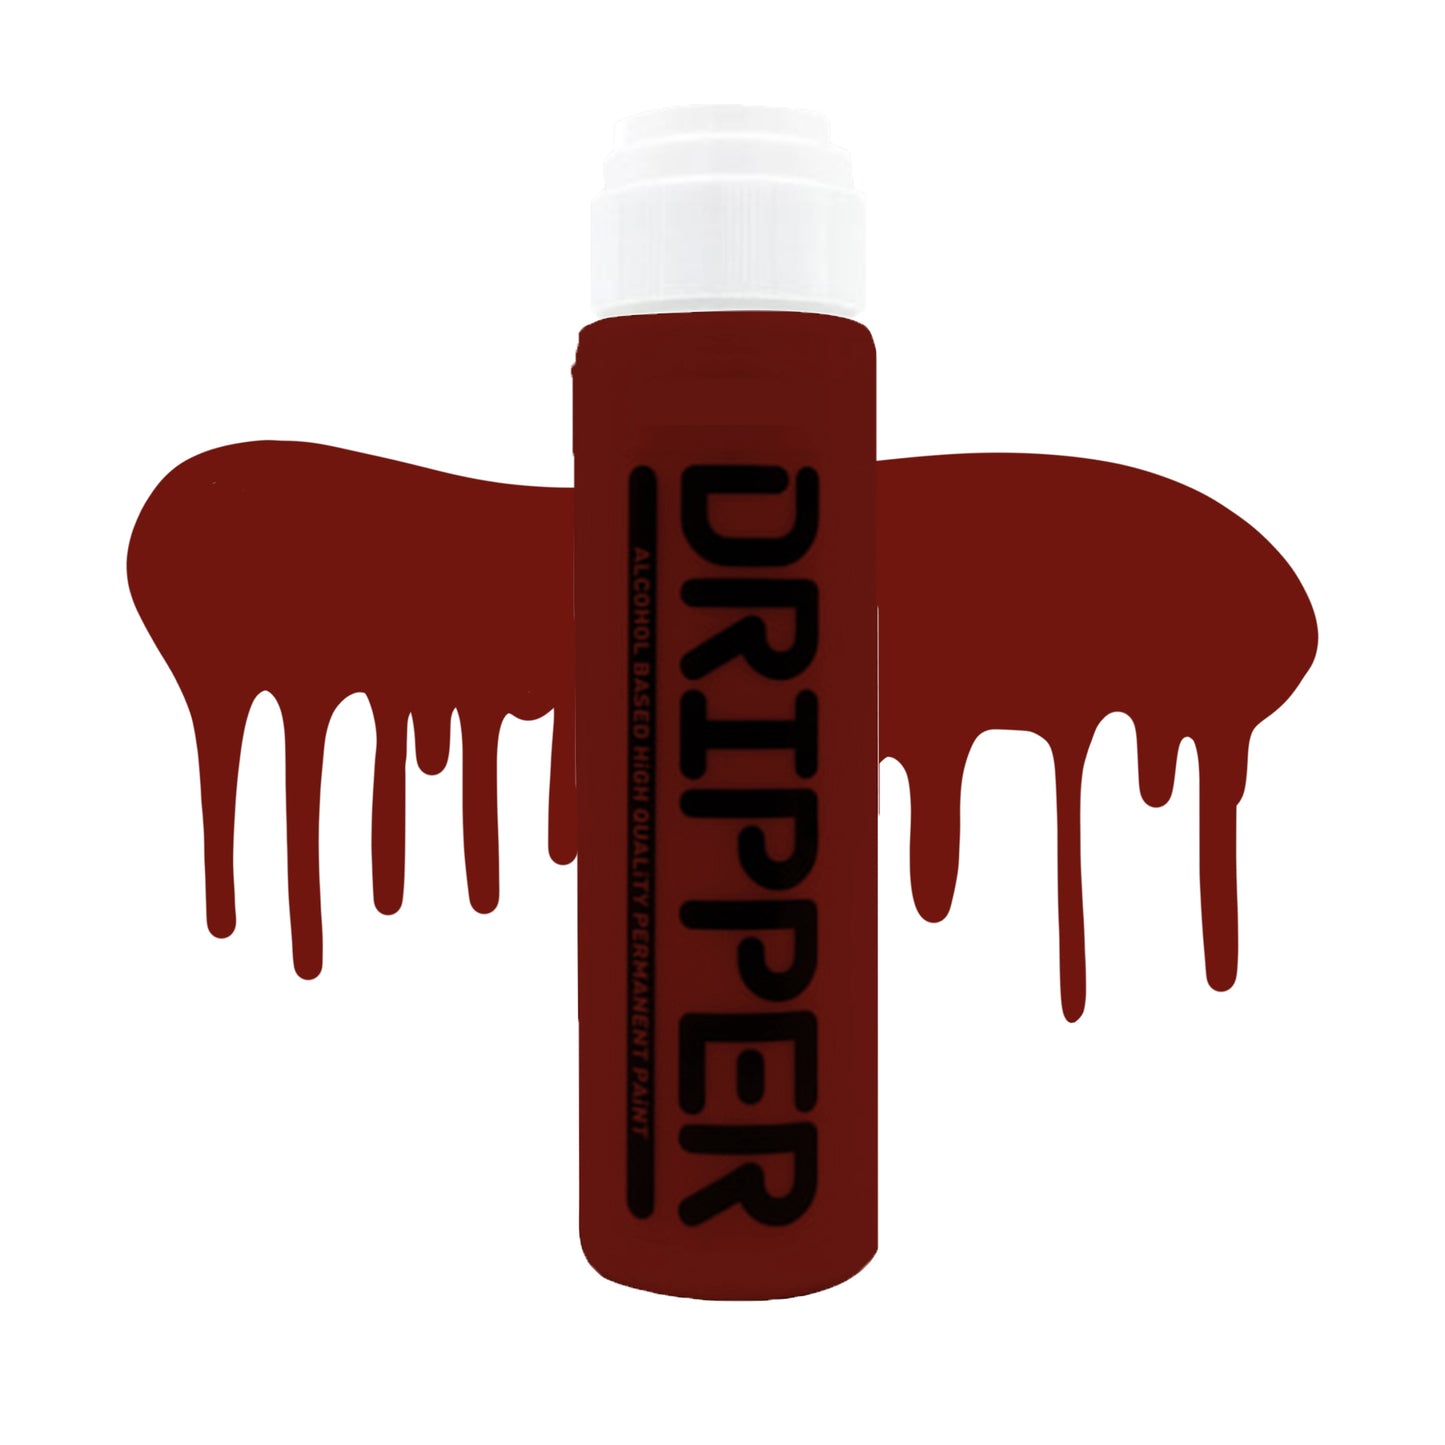 Dope Paint, Graffiti Squeeze Dripper Mop Marker in red brown.